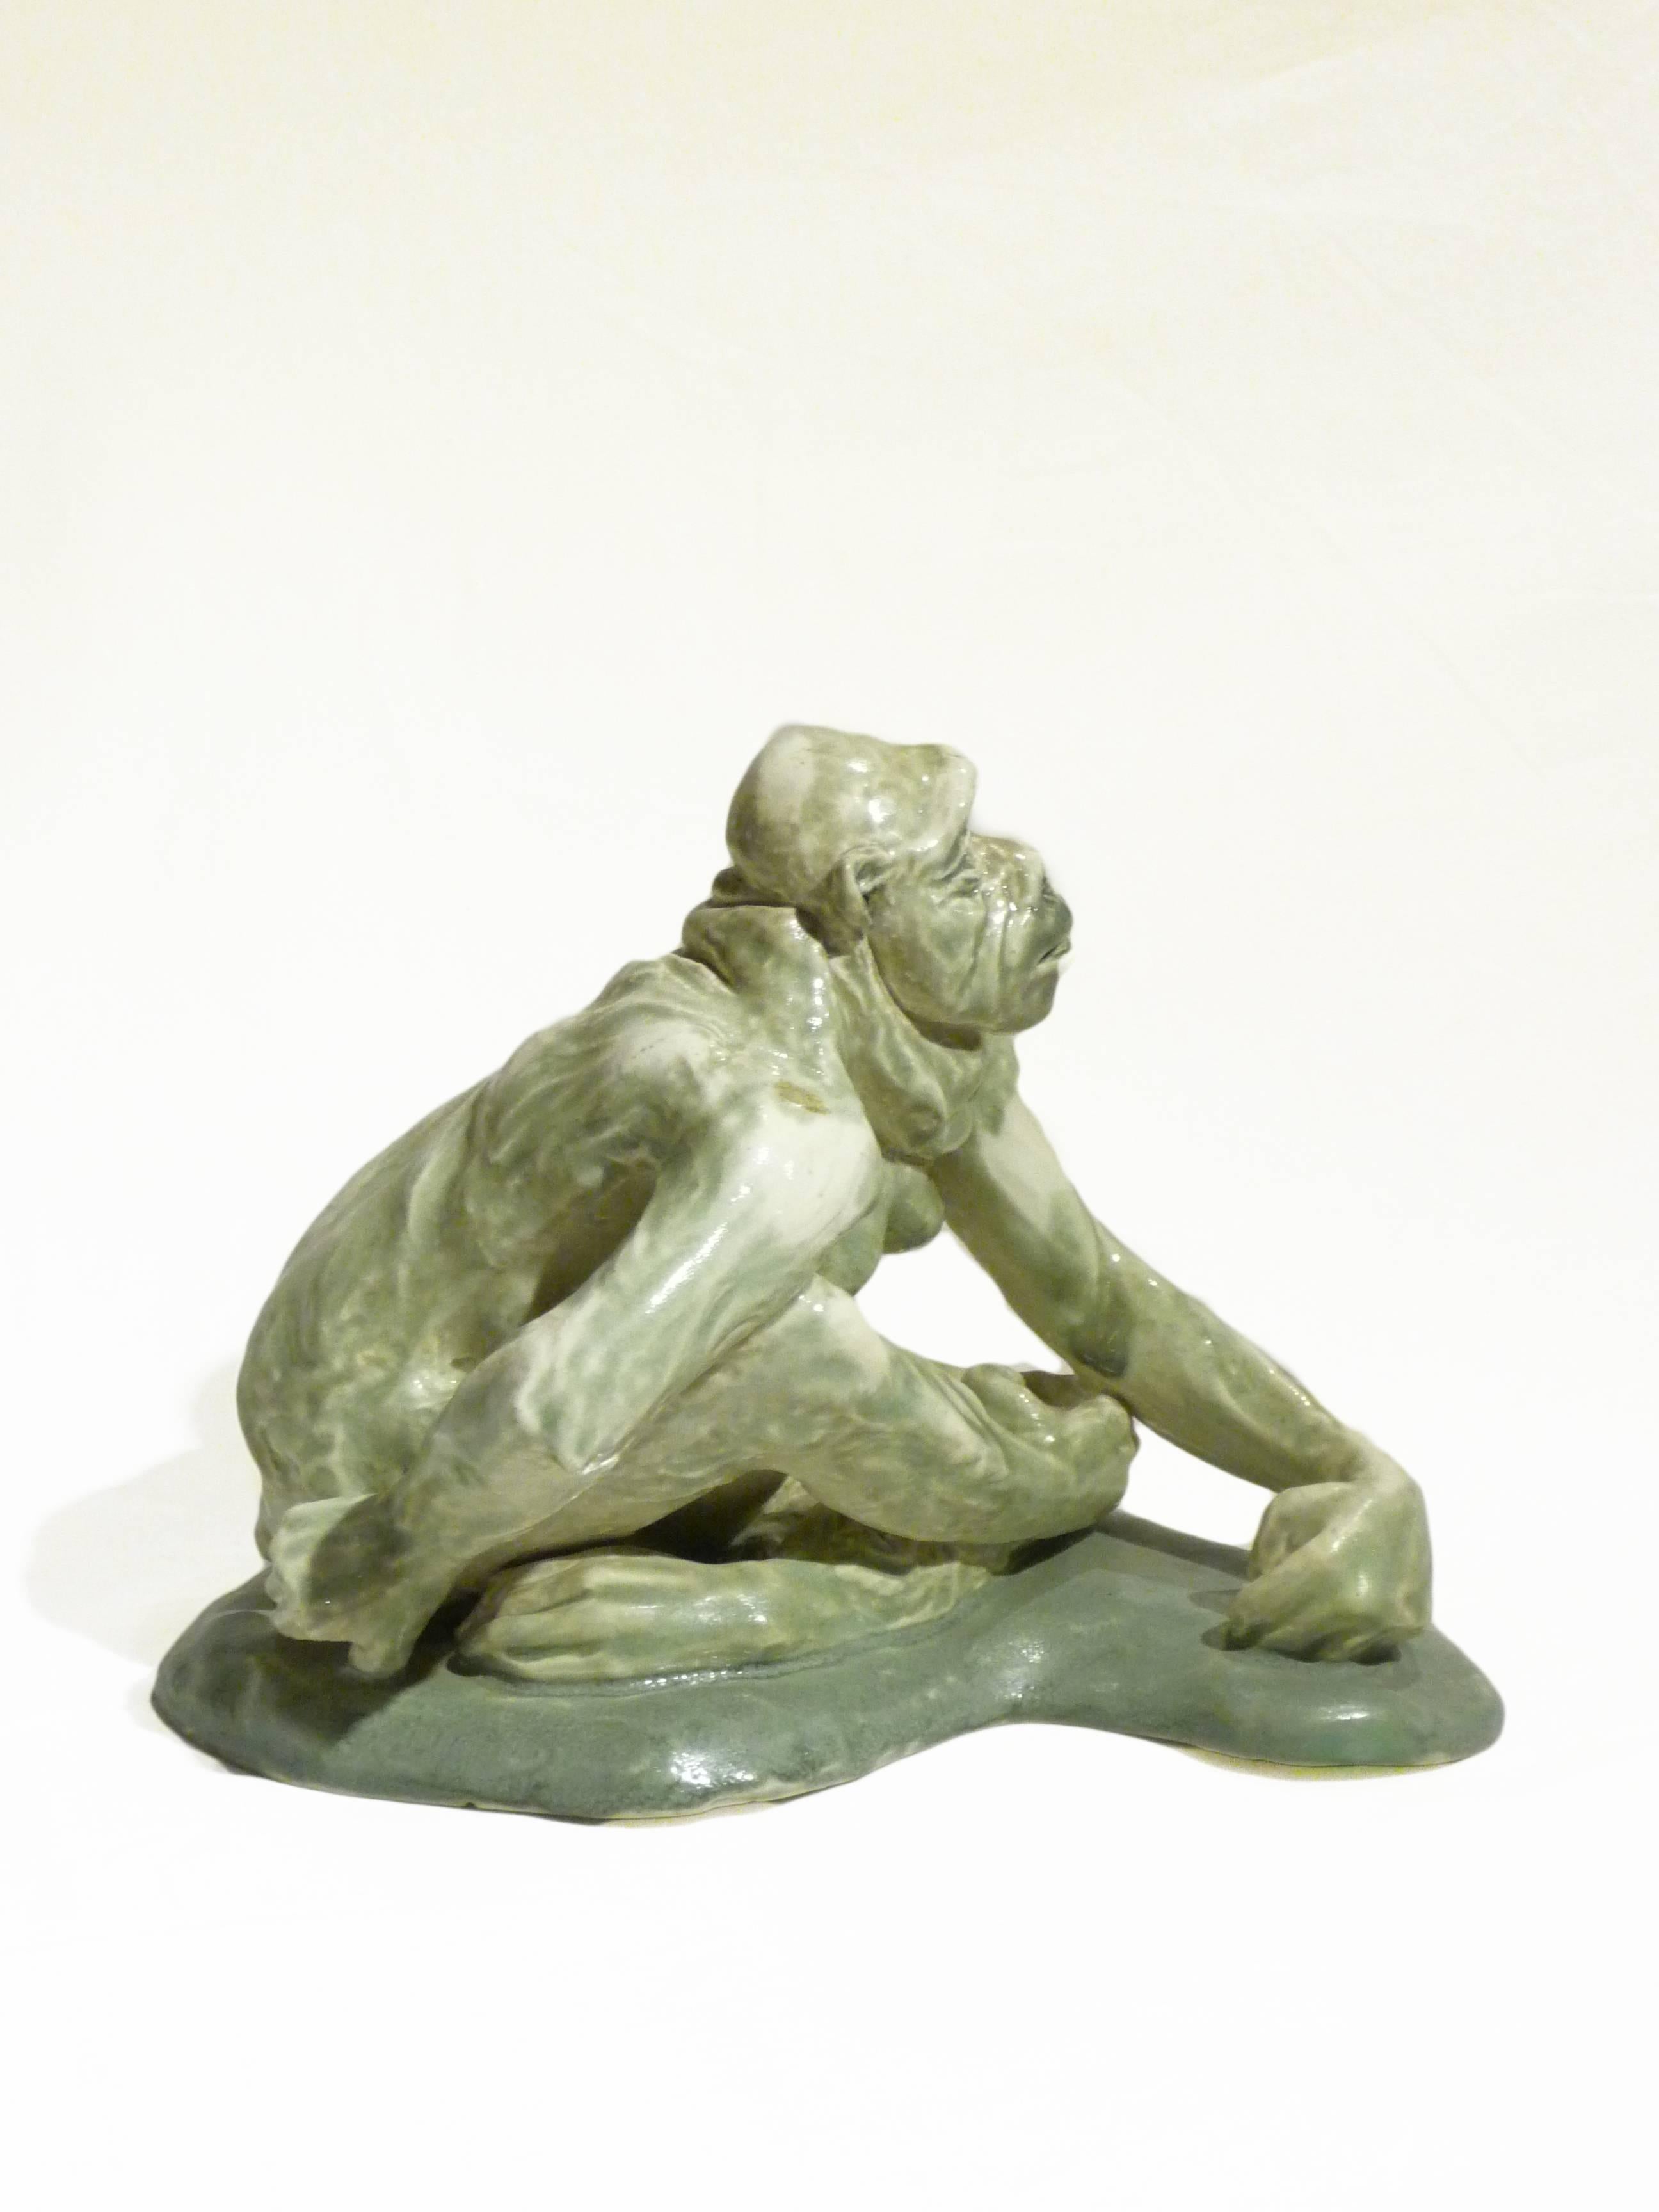 Pierre-Adrien Dalpayrat.
Green and white stoneware sculpture representing a female monkey.
Impressed with the circular seal "Les grands feux de Dalpayrat."

